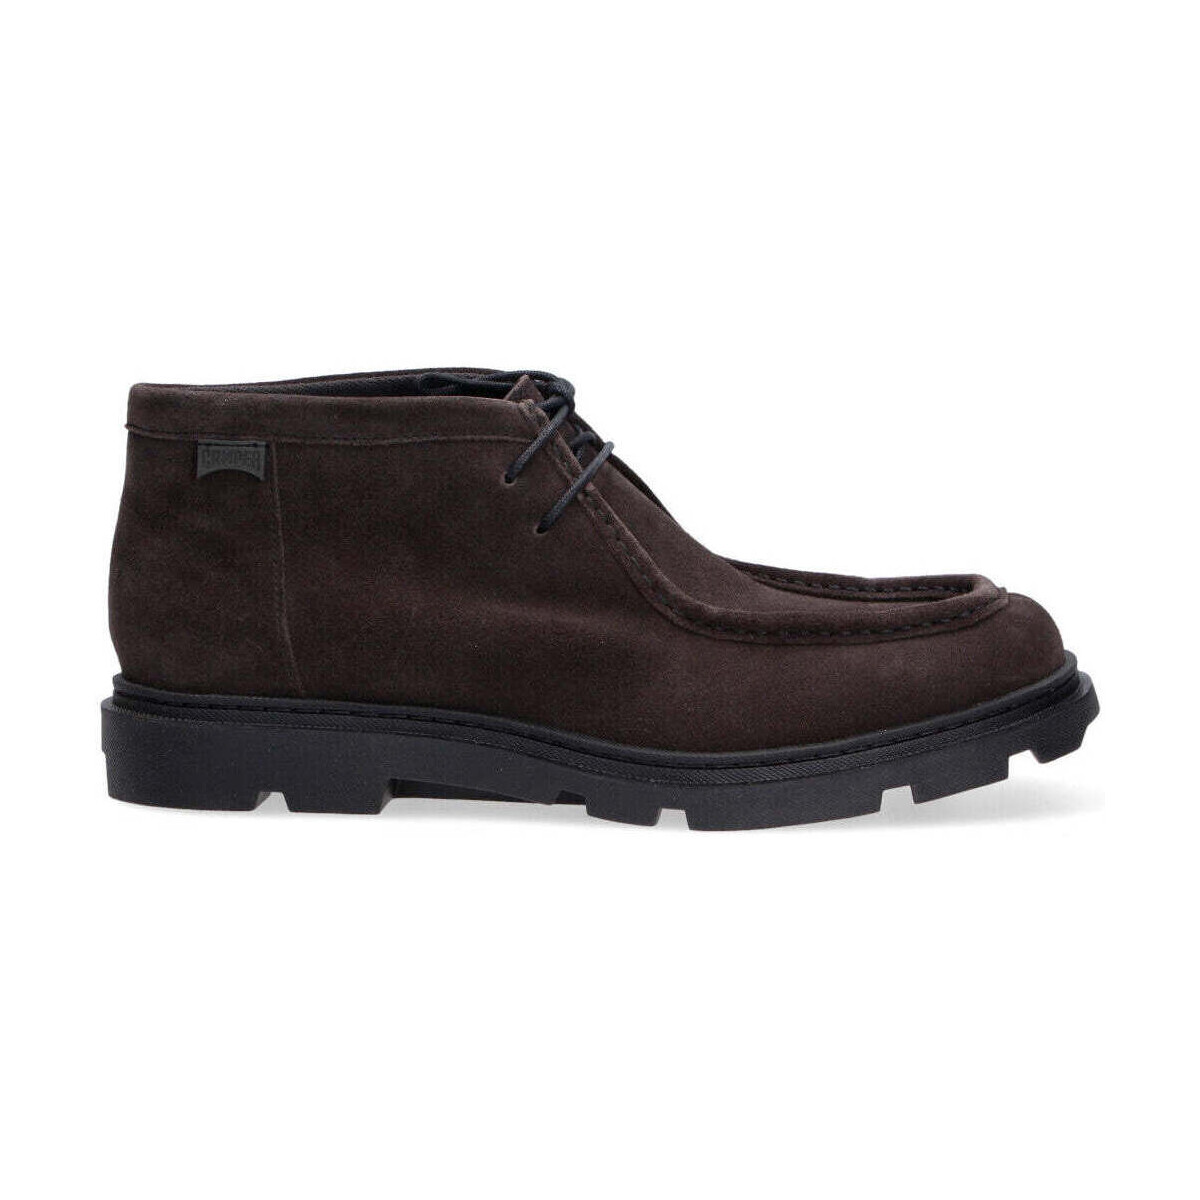 Chaussures Homme Boots Camper  Gris